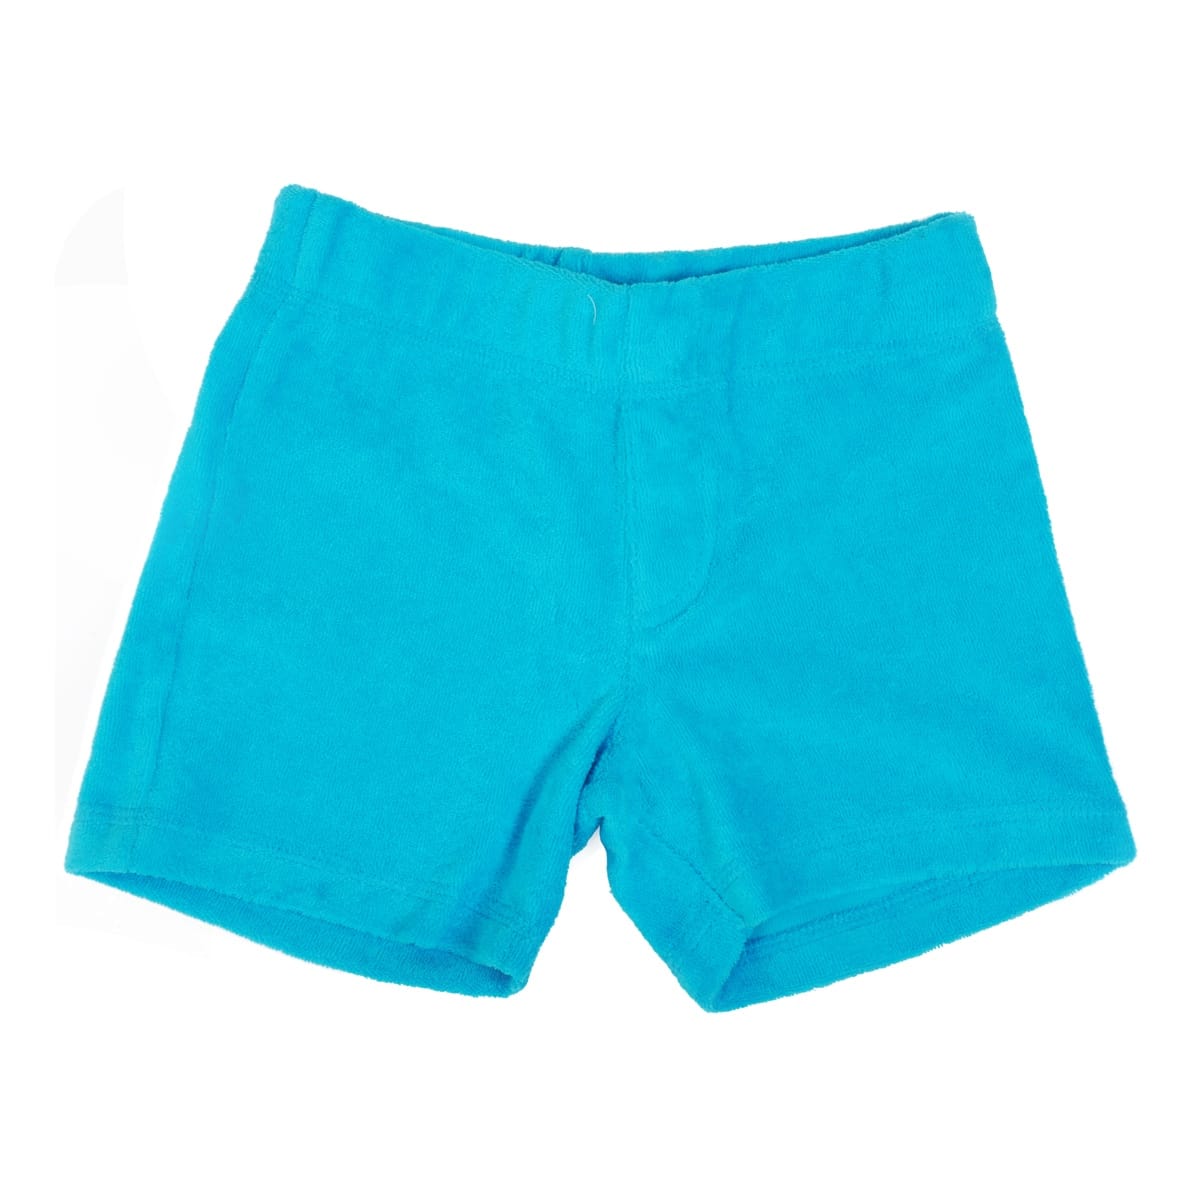 DUNS Sweden terry shorts - atoll blue